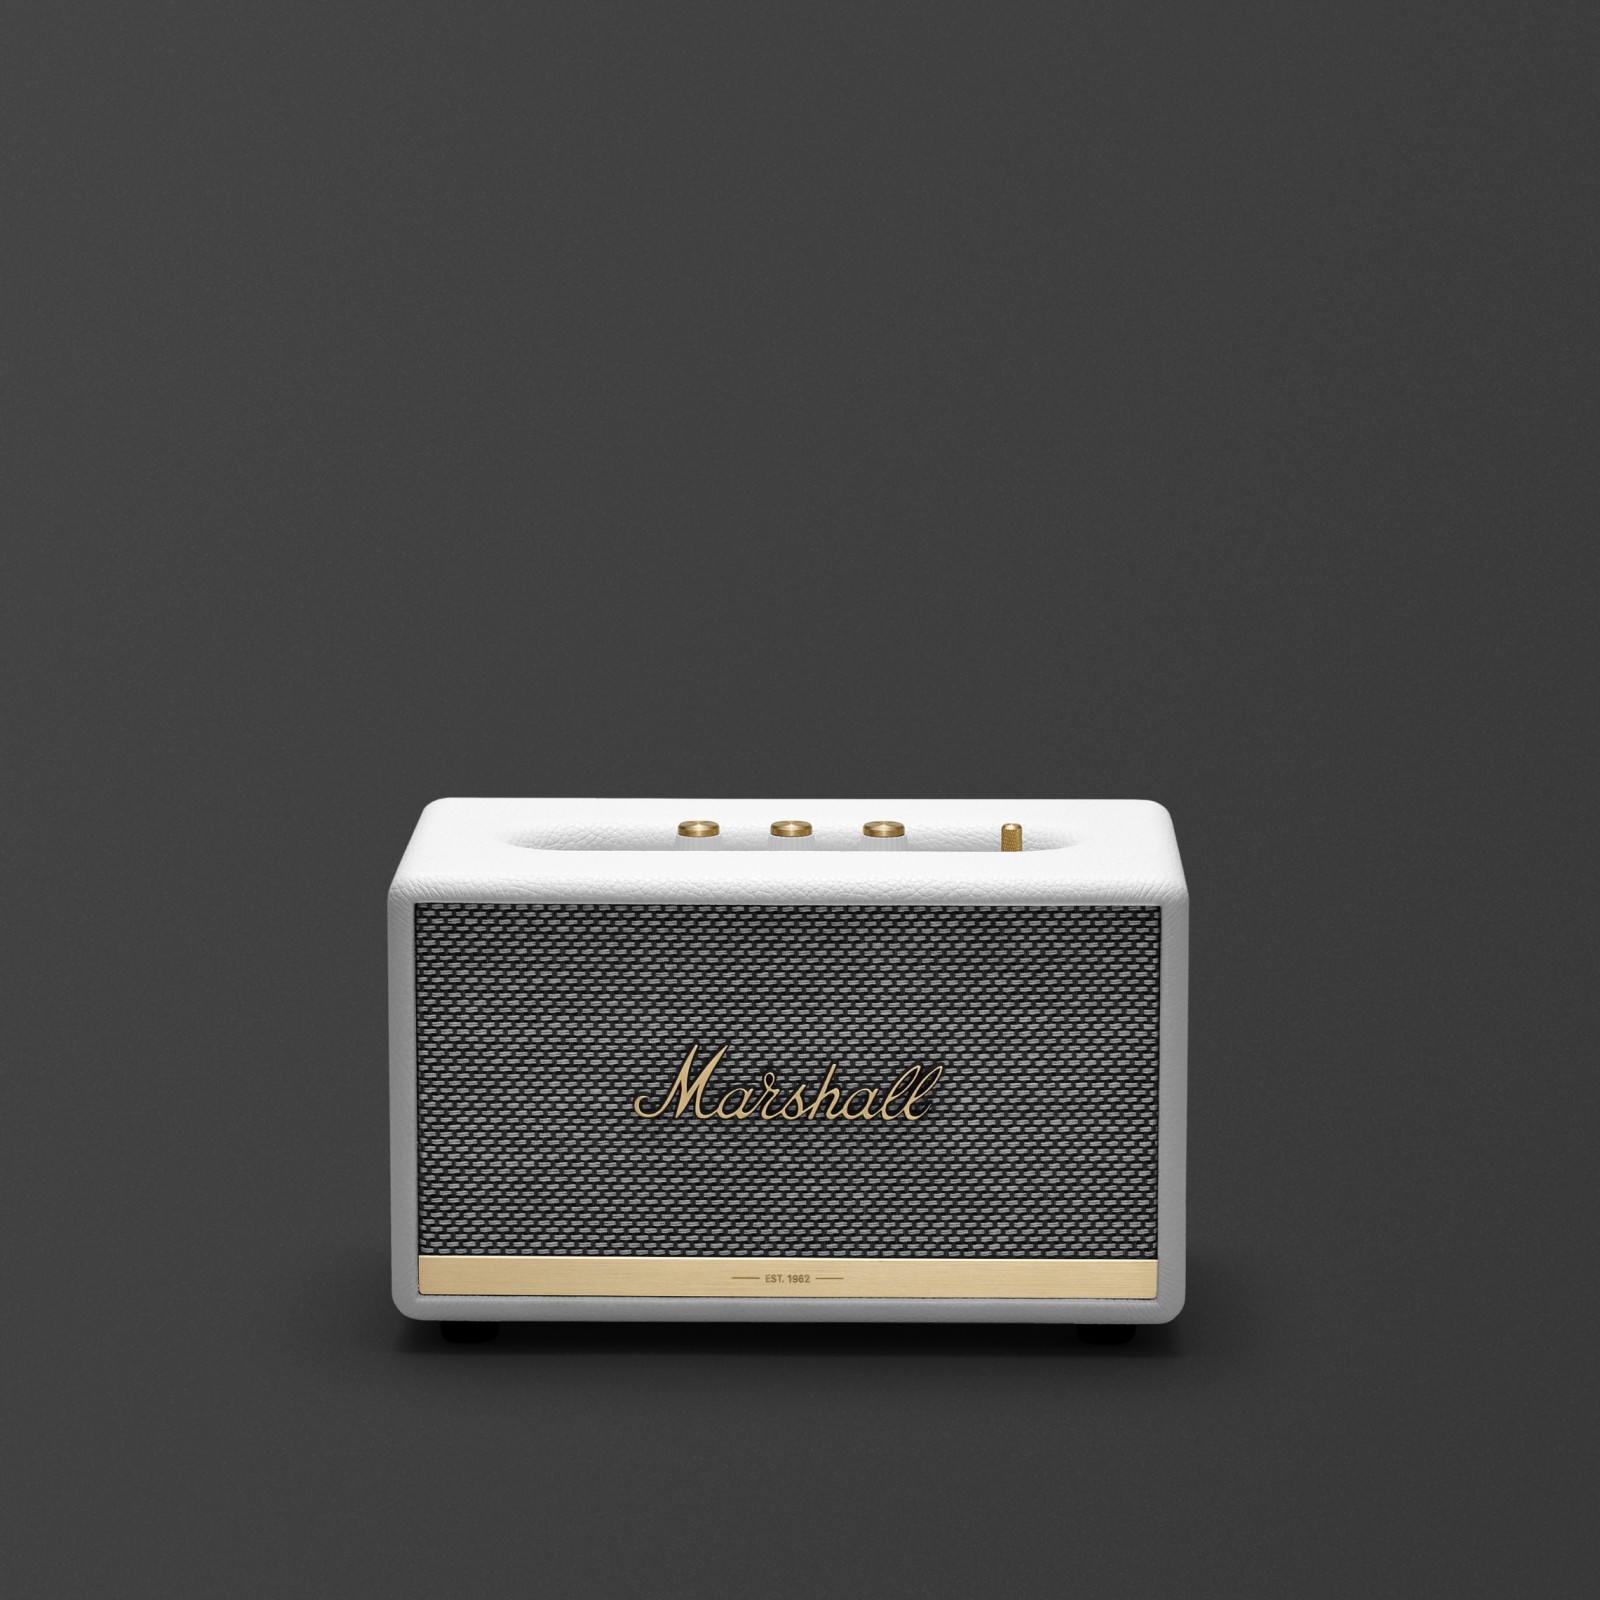 Front image of the Marshall Acton II White Speaker